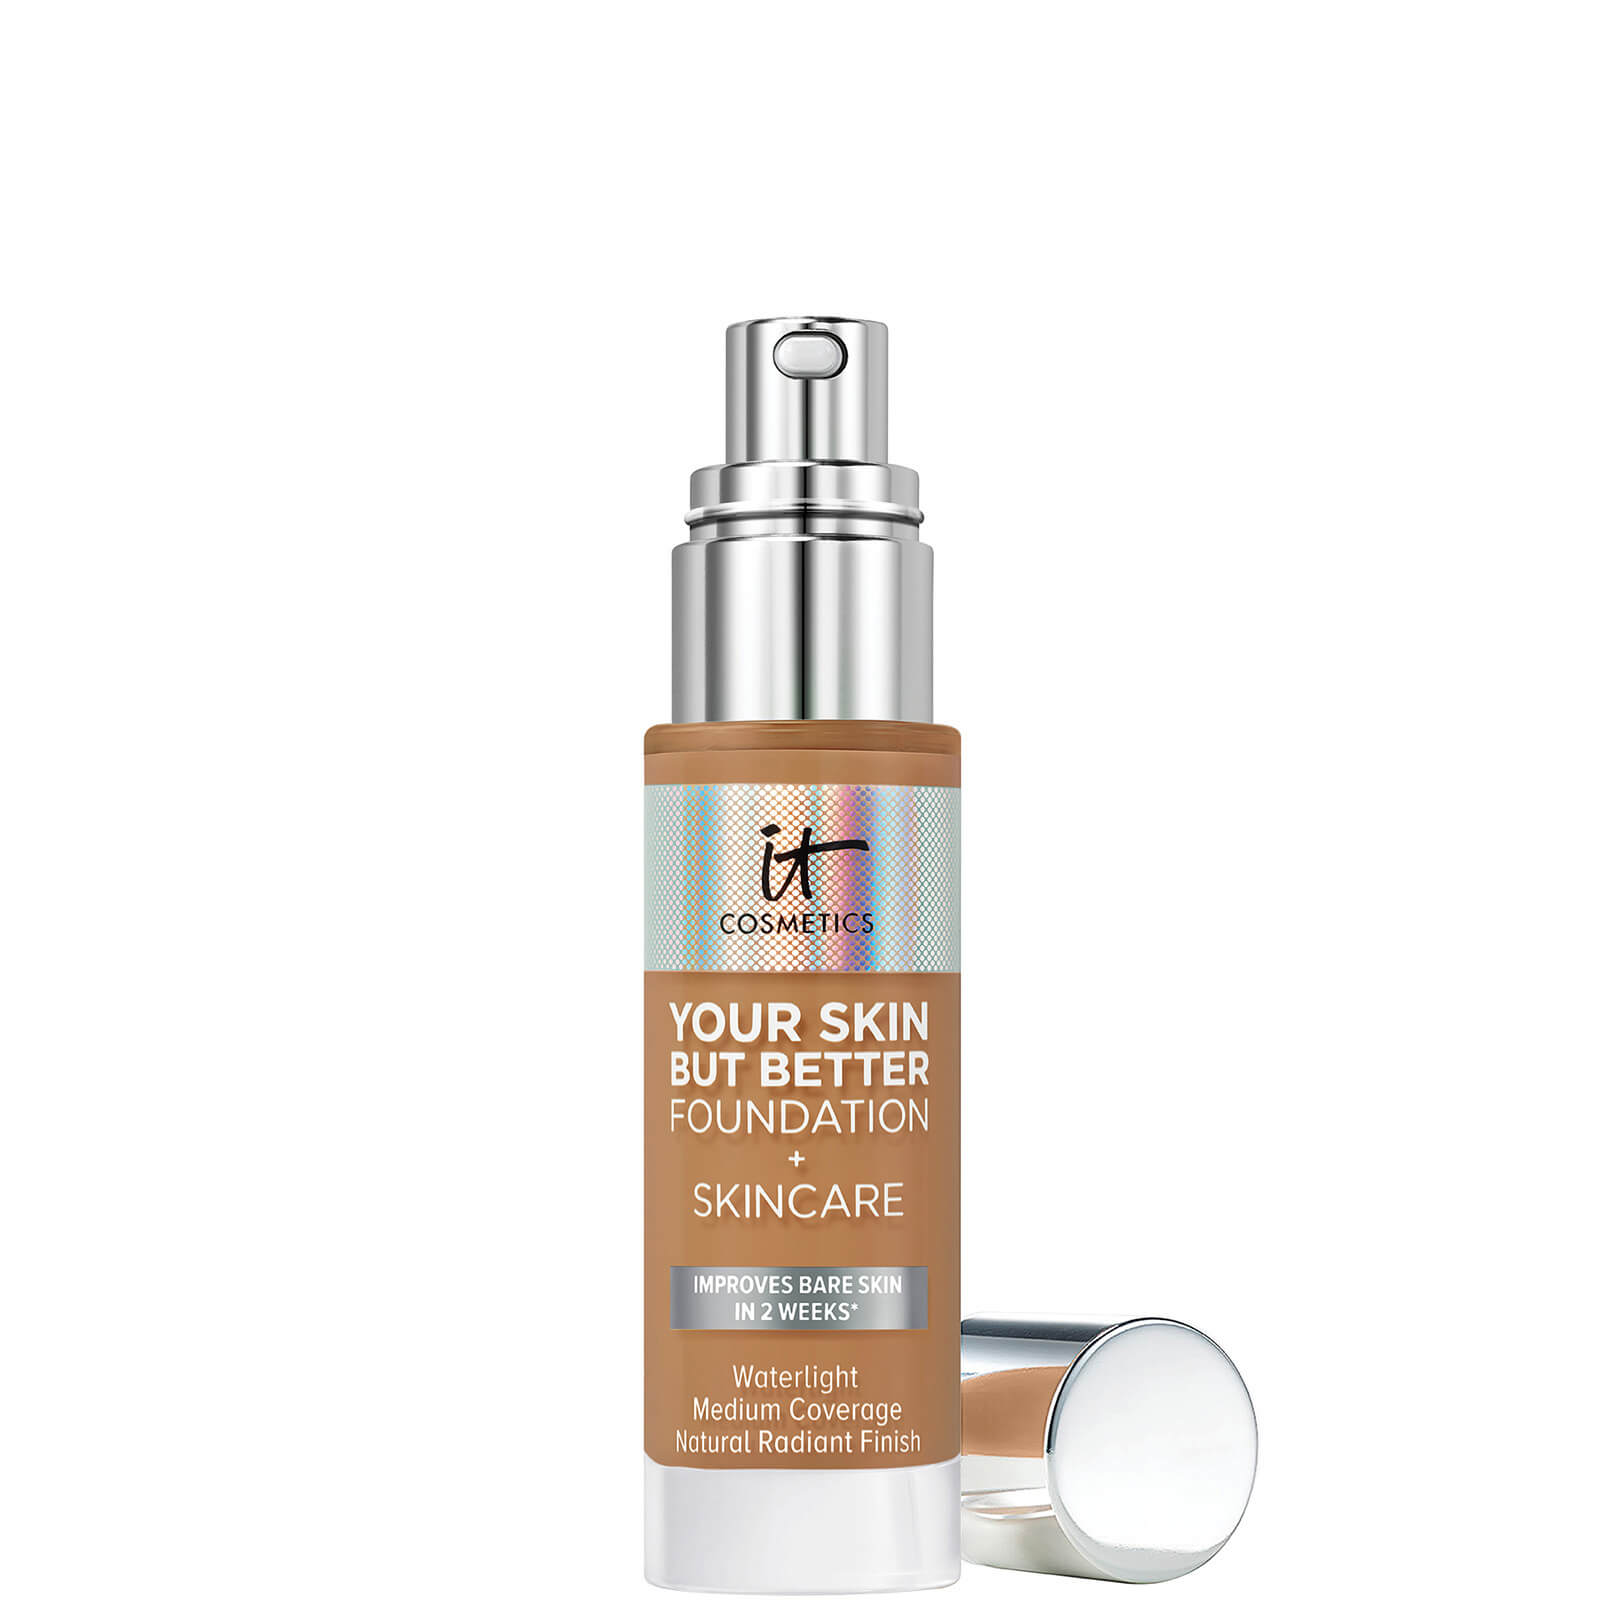 IT Cosmetics Your Skin But Better Foundation and Skincare 30ml (Various Shades) - 43 Tan Warm